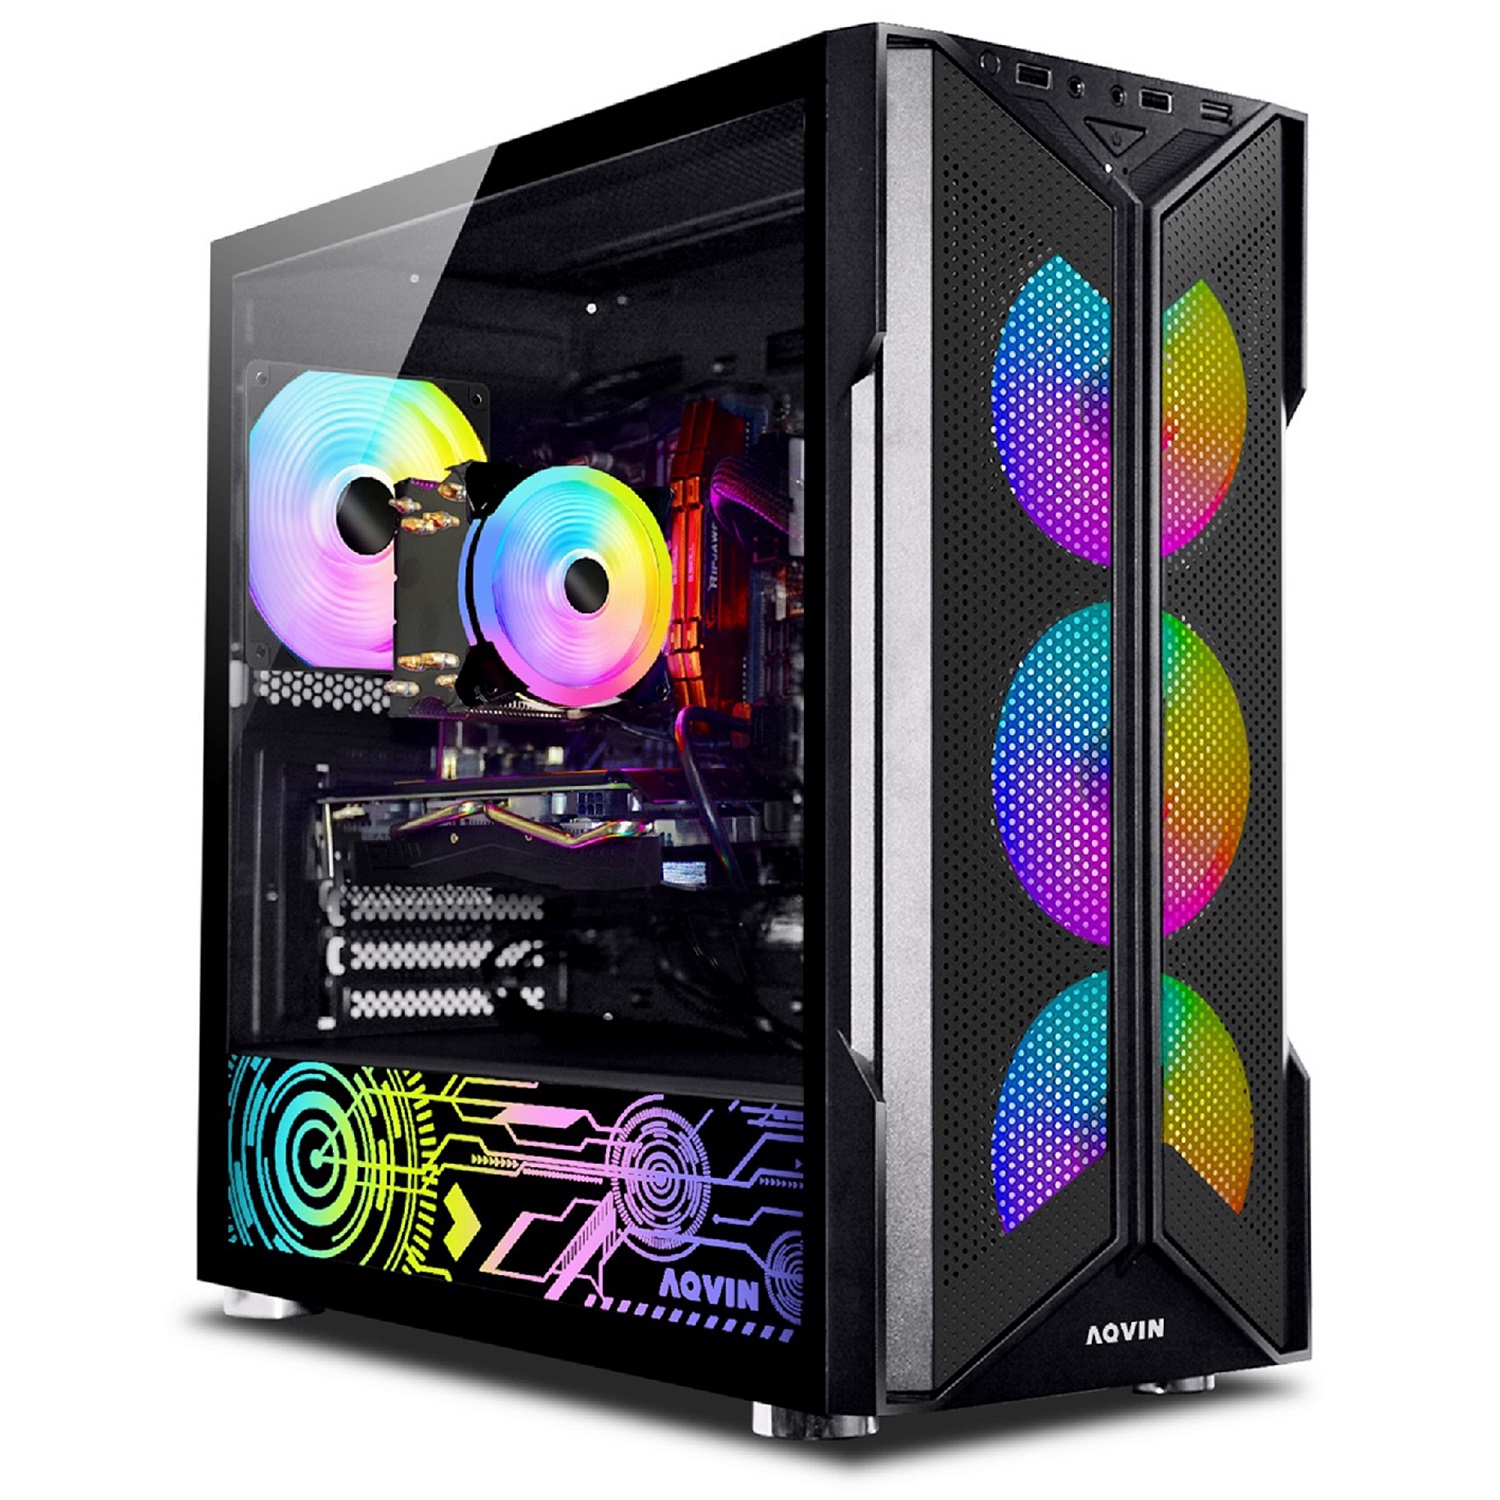 AQVIN-AQ20 Gaming PC Desktop Computer Tower- RGB / Intel Core i7 up to 4.60 GHz, 32GB DDR4 RAM, 1TB SSD, GeForce GTX 1650 4GB, Windows 11 - Only at Best Buy